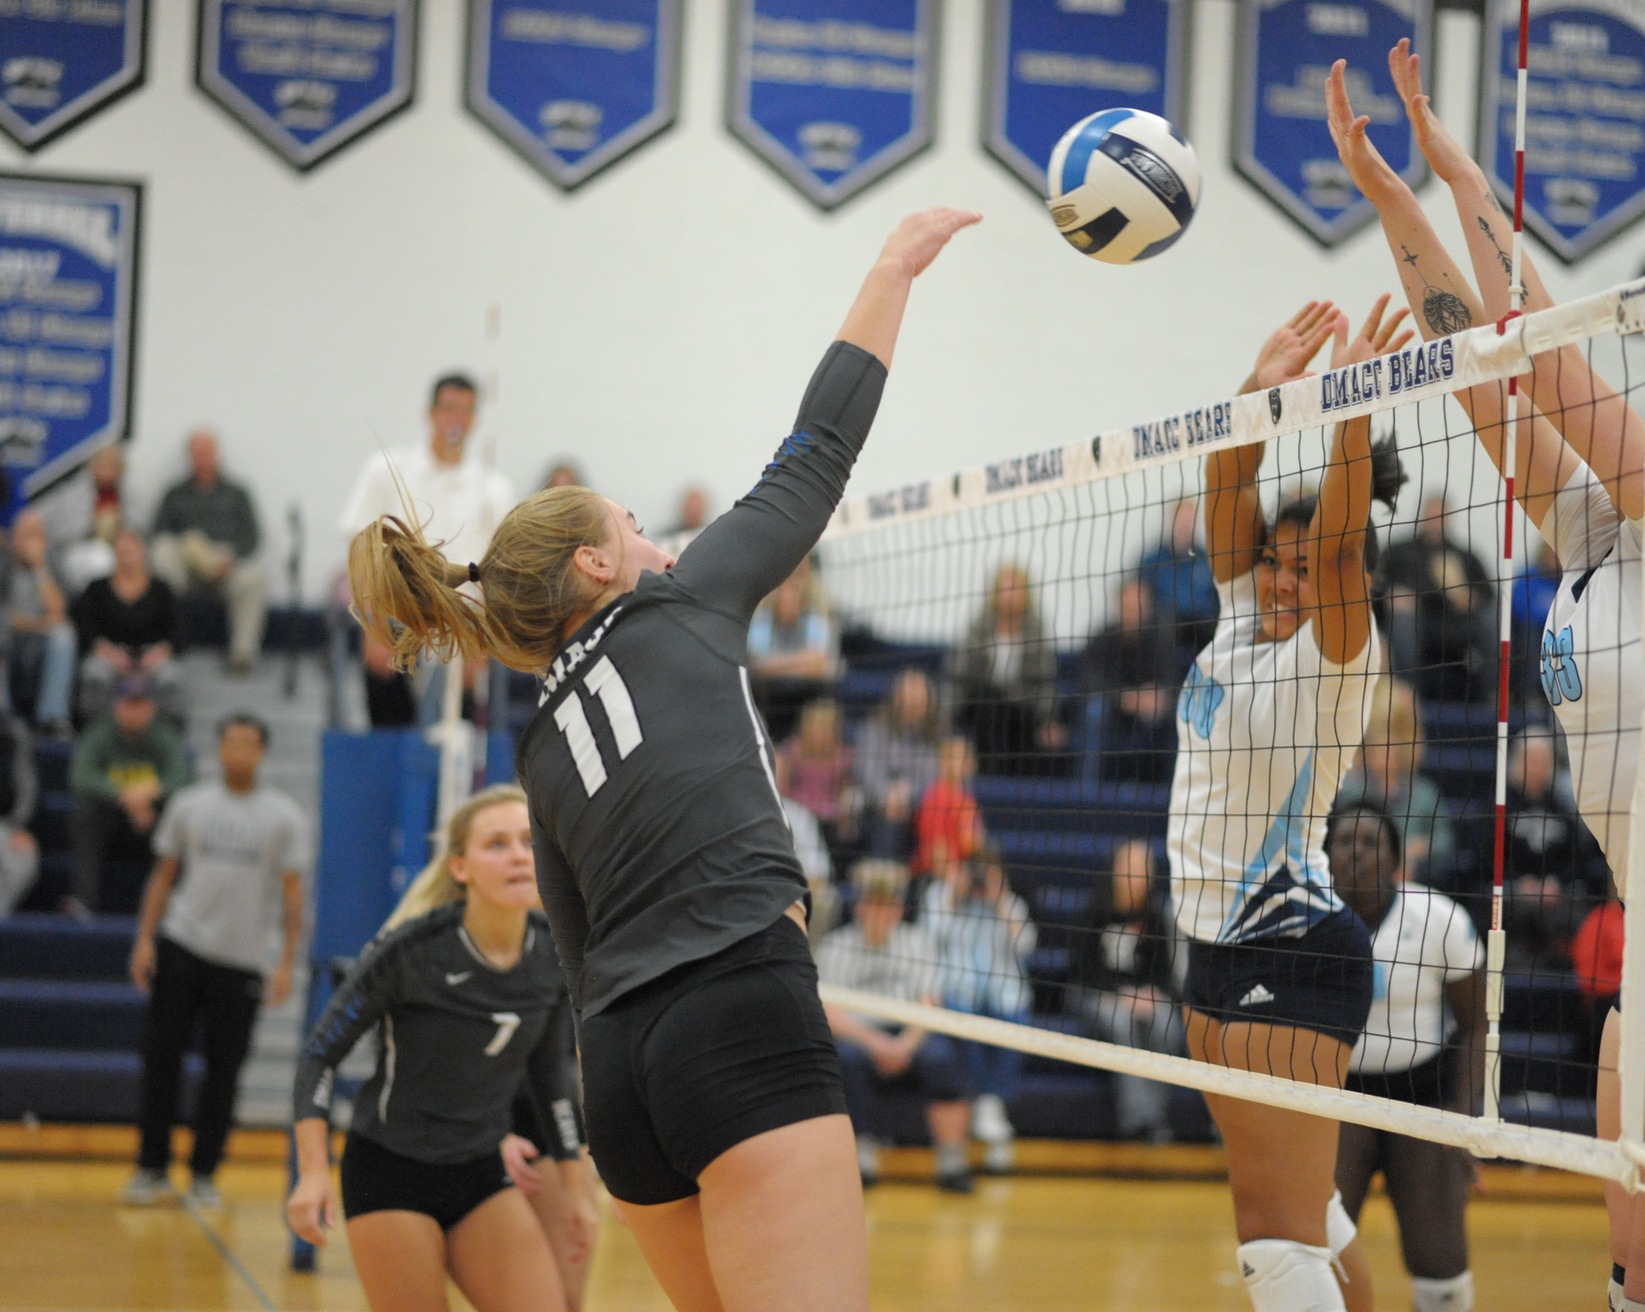 DMACC Volleyball Team Falls to Indian Hills in Regular-Season Finale, 3-0